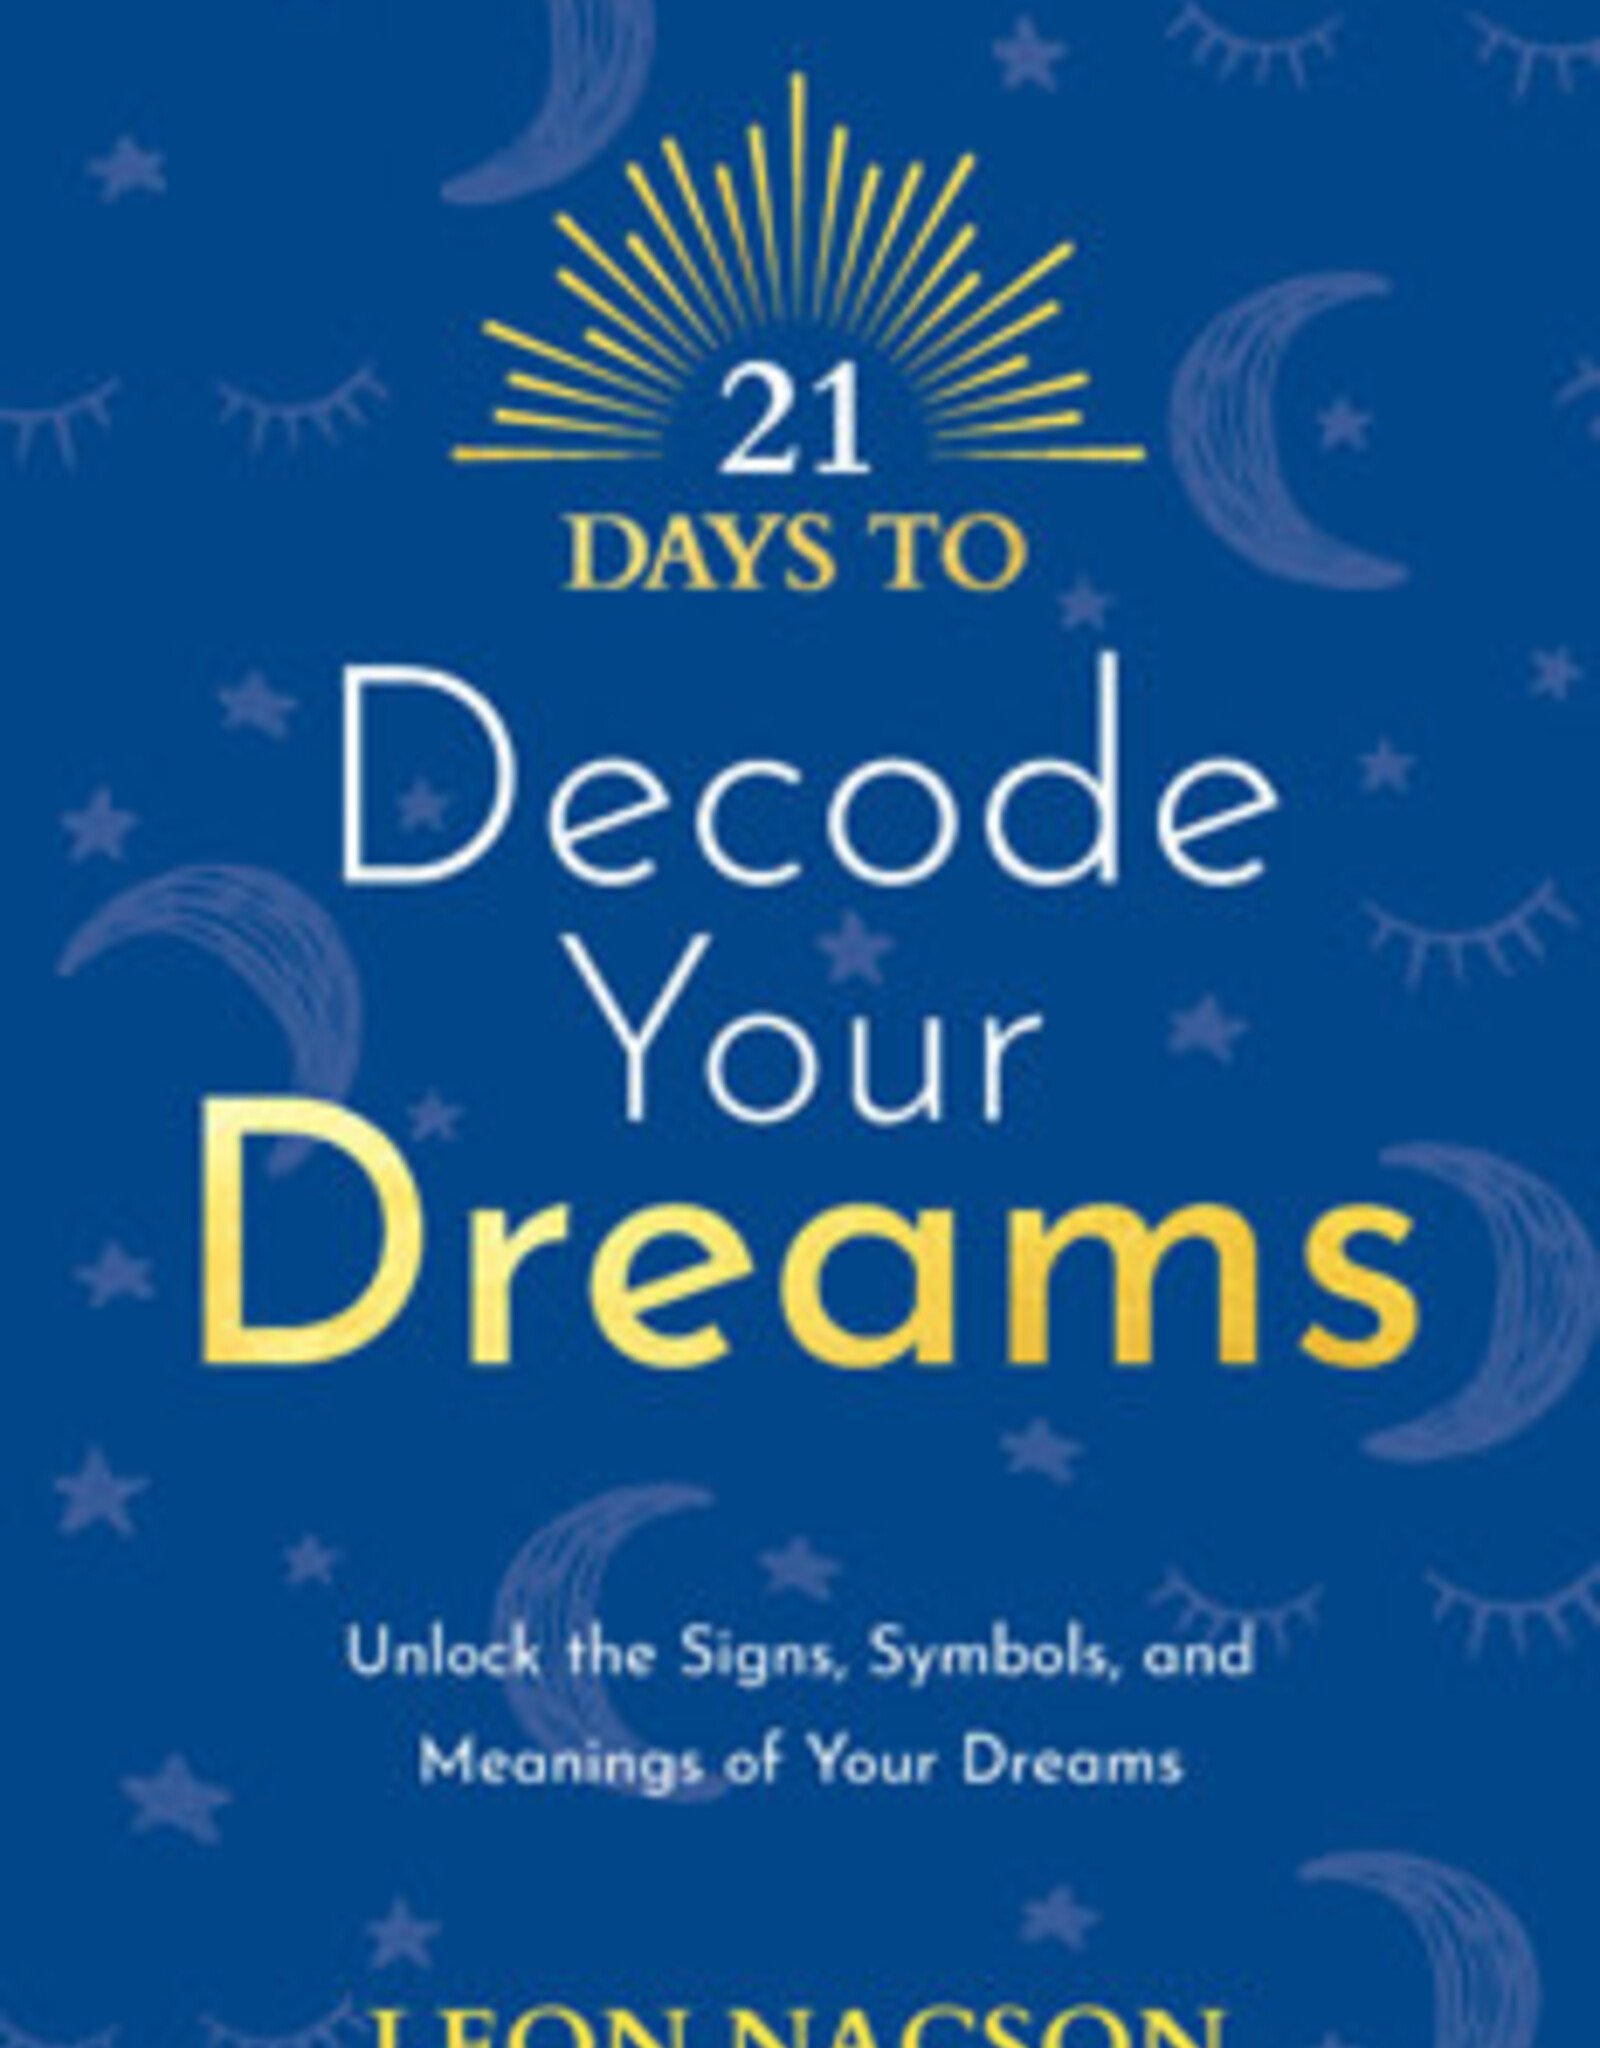 21 Days to Decode Your Dreams